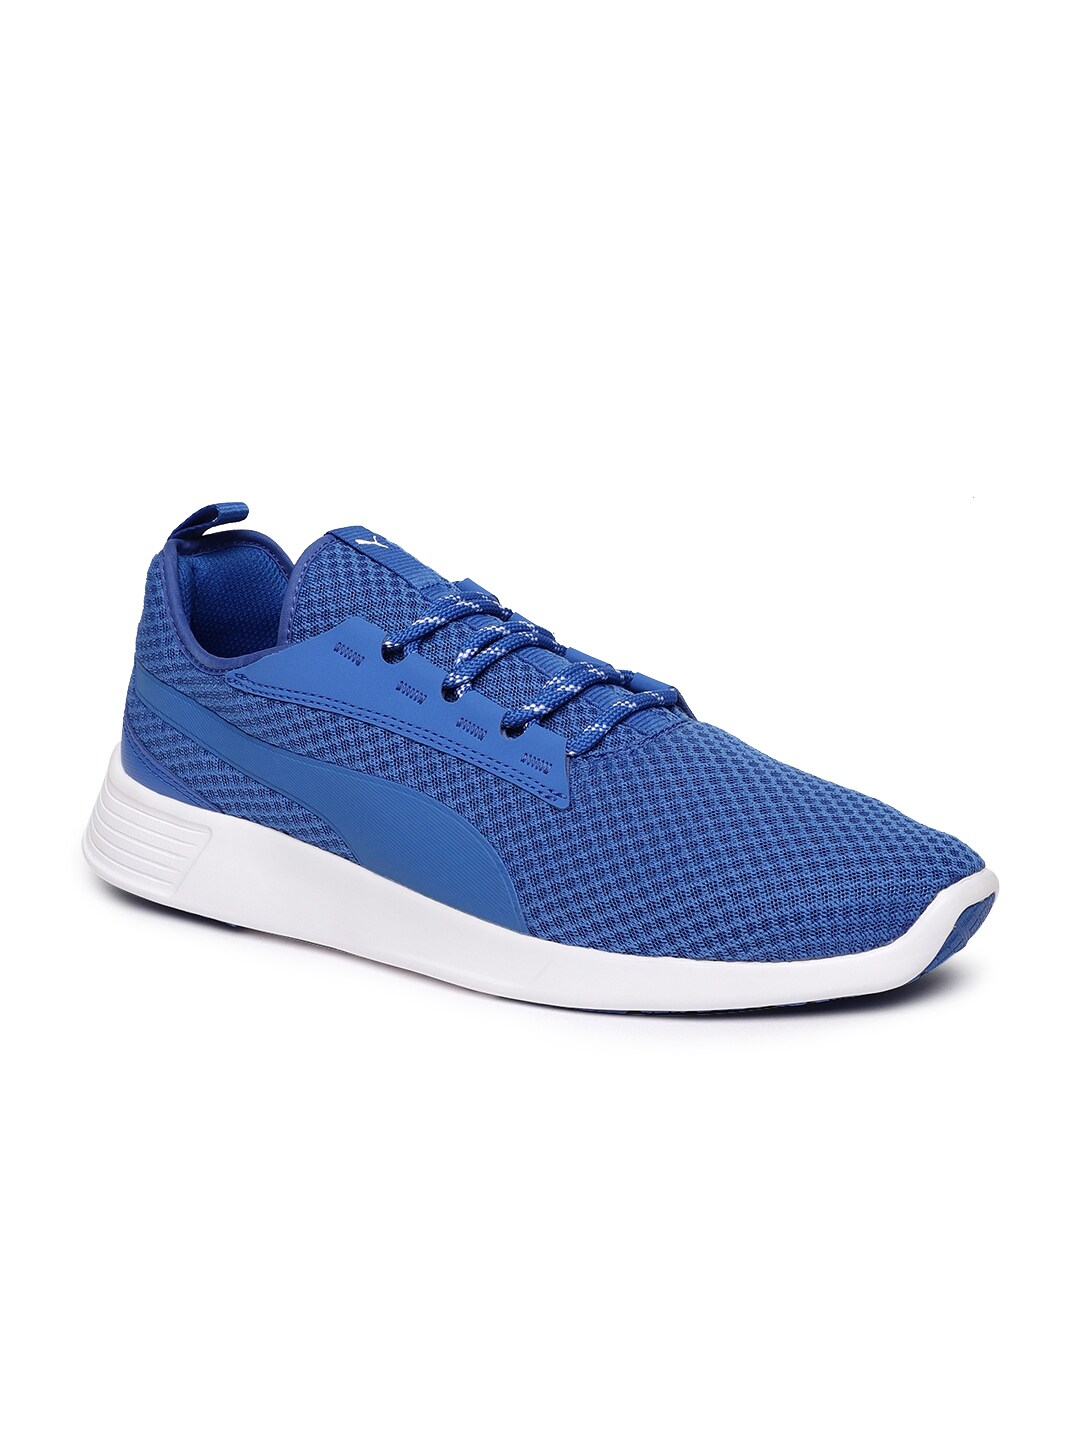 Puma Unisex Blue Solid ST Trainer Evo v2 Training Shoes Price in India